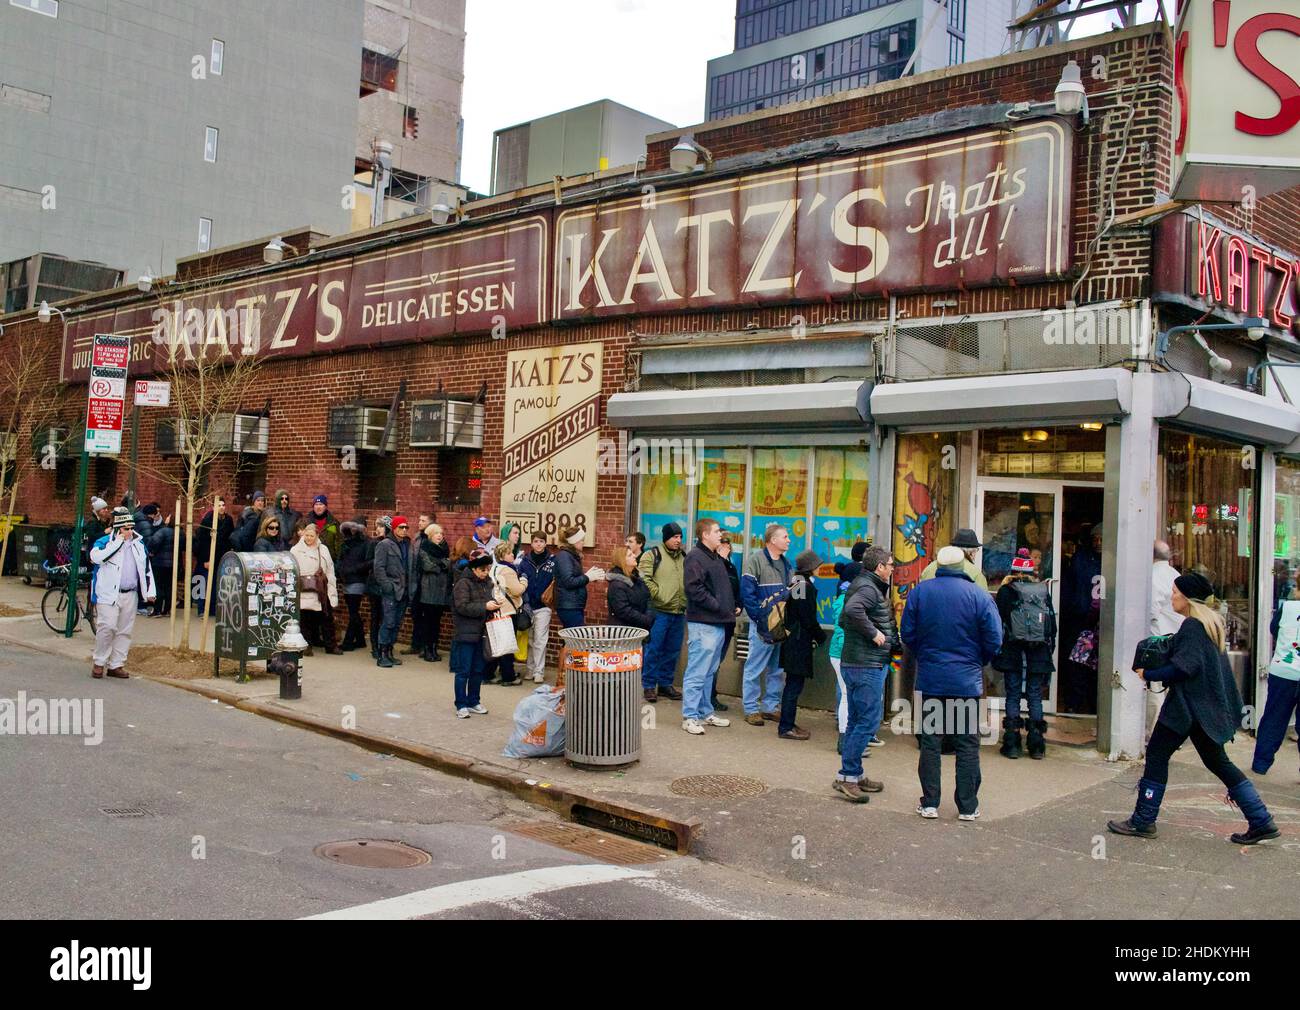 Outside of World famous Katz's Deli, located on the lower east side of Manhattan, NYC, USA. Crowd lines up to get in. Stock Photo